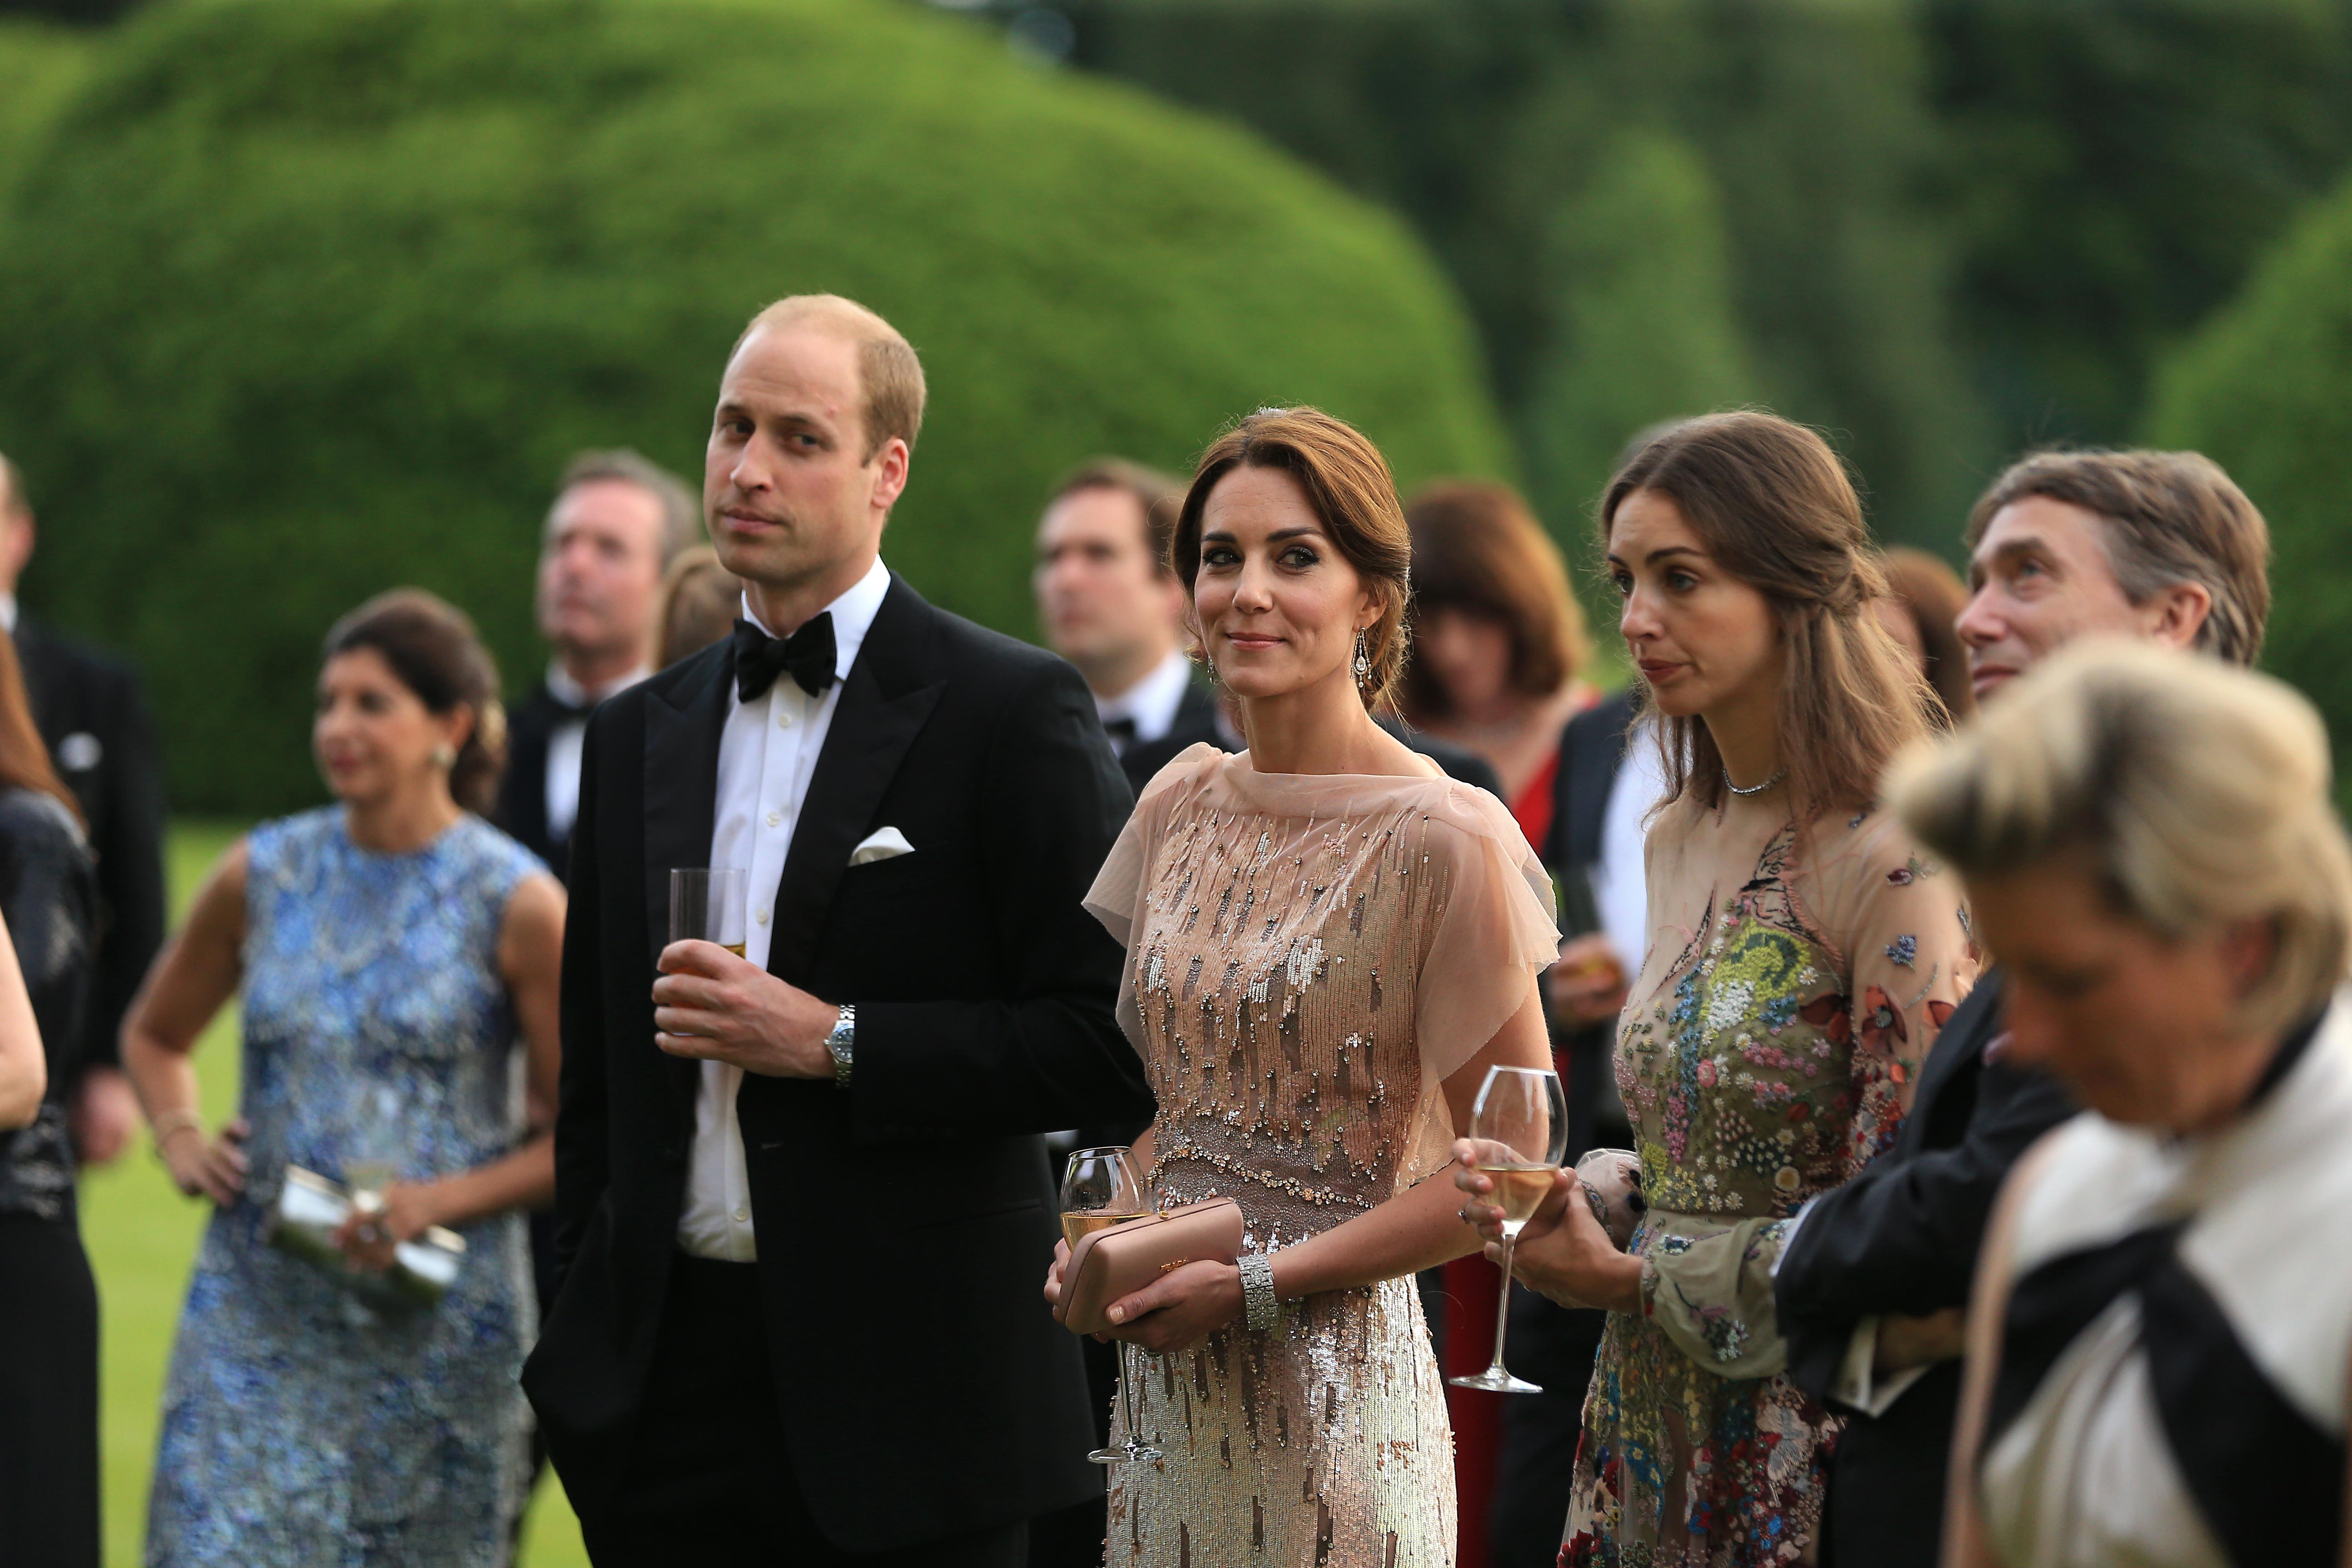 Prince William, Catherine, Duchess of Cambridge, David Cholmondeley, Marquess of Cholmondeley and Rose Cholmondeley, the Marchioness of Cholmondeley at a gala dinner on June 22, 2016 in King's Lynn, England | Source: Getty Images